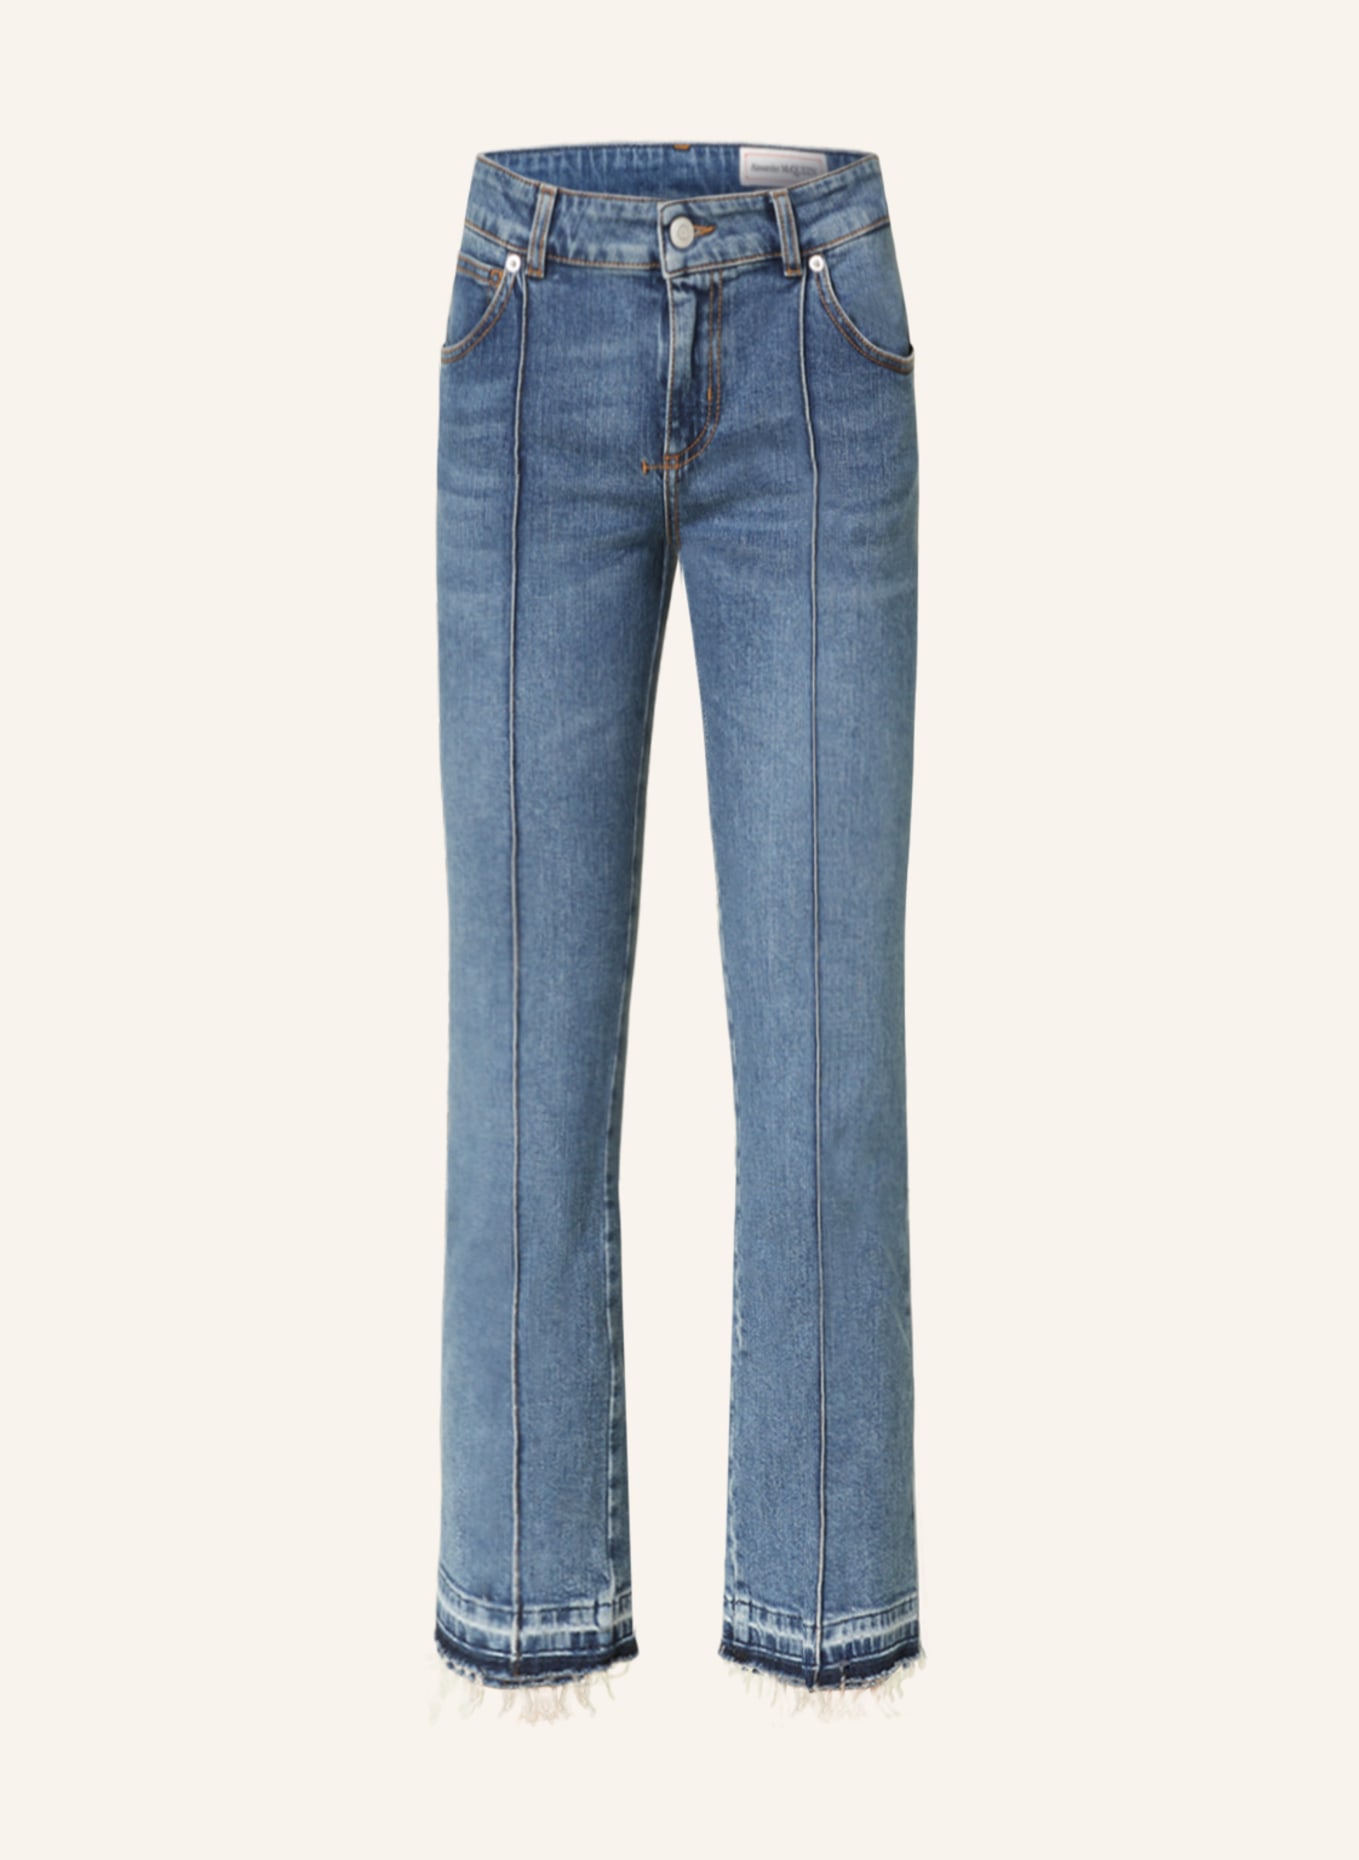 Alexander McQUEEN Skinny jeans, Color: 4164 BLUE STONE WASH (Image 1)